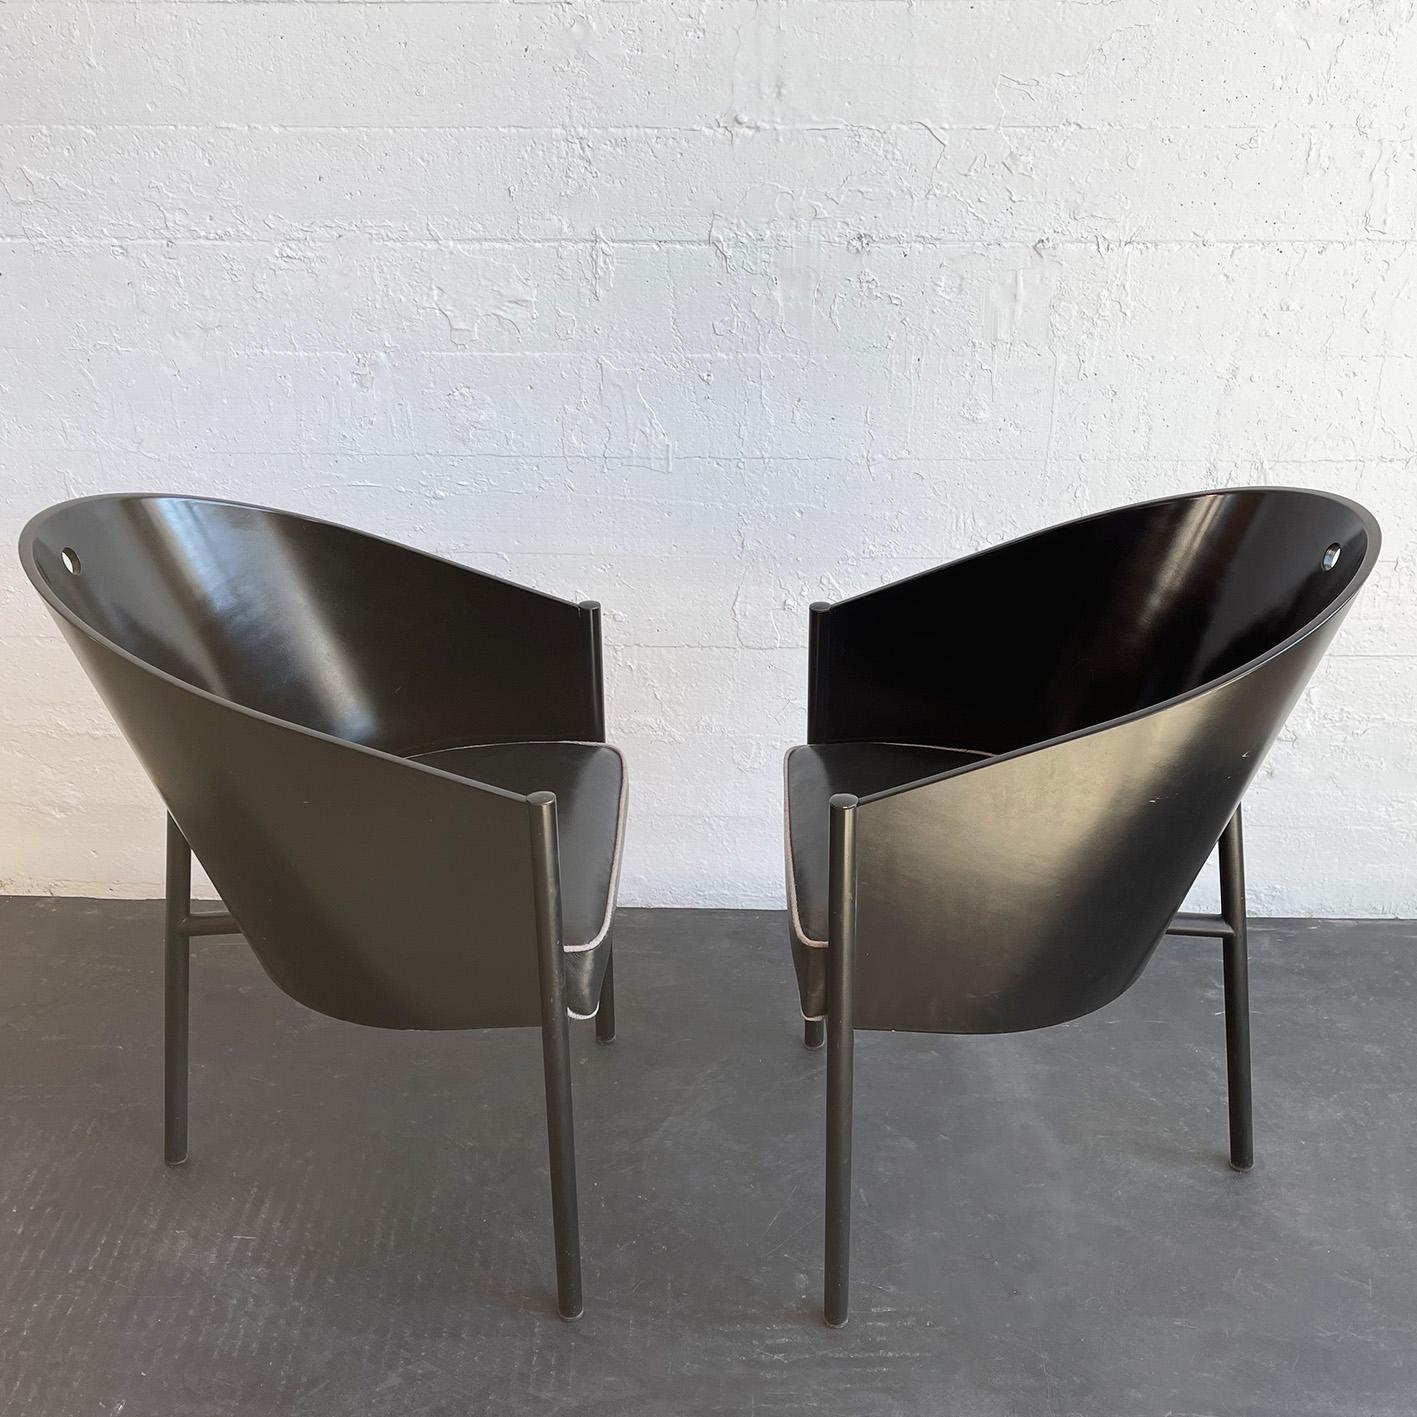 French Pair of Black Costes Chairs by Philippe Starck